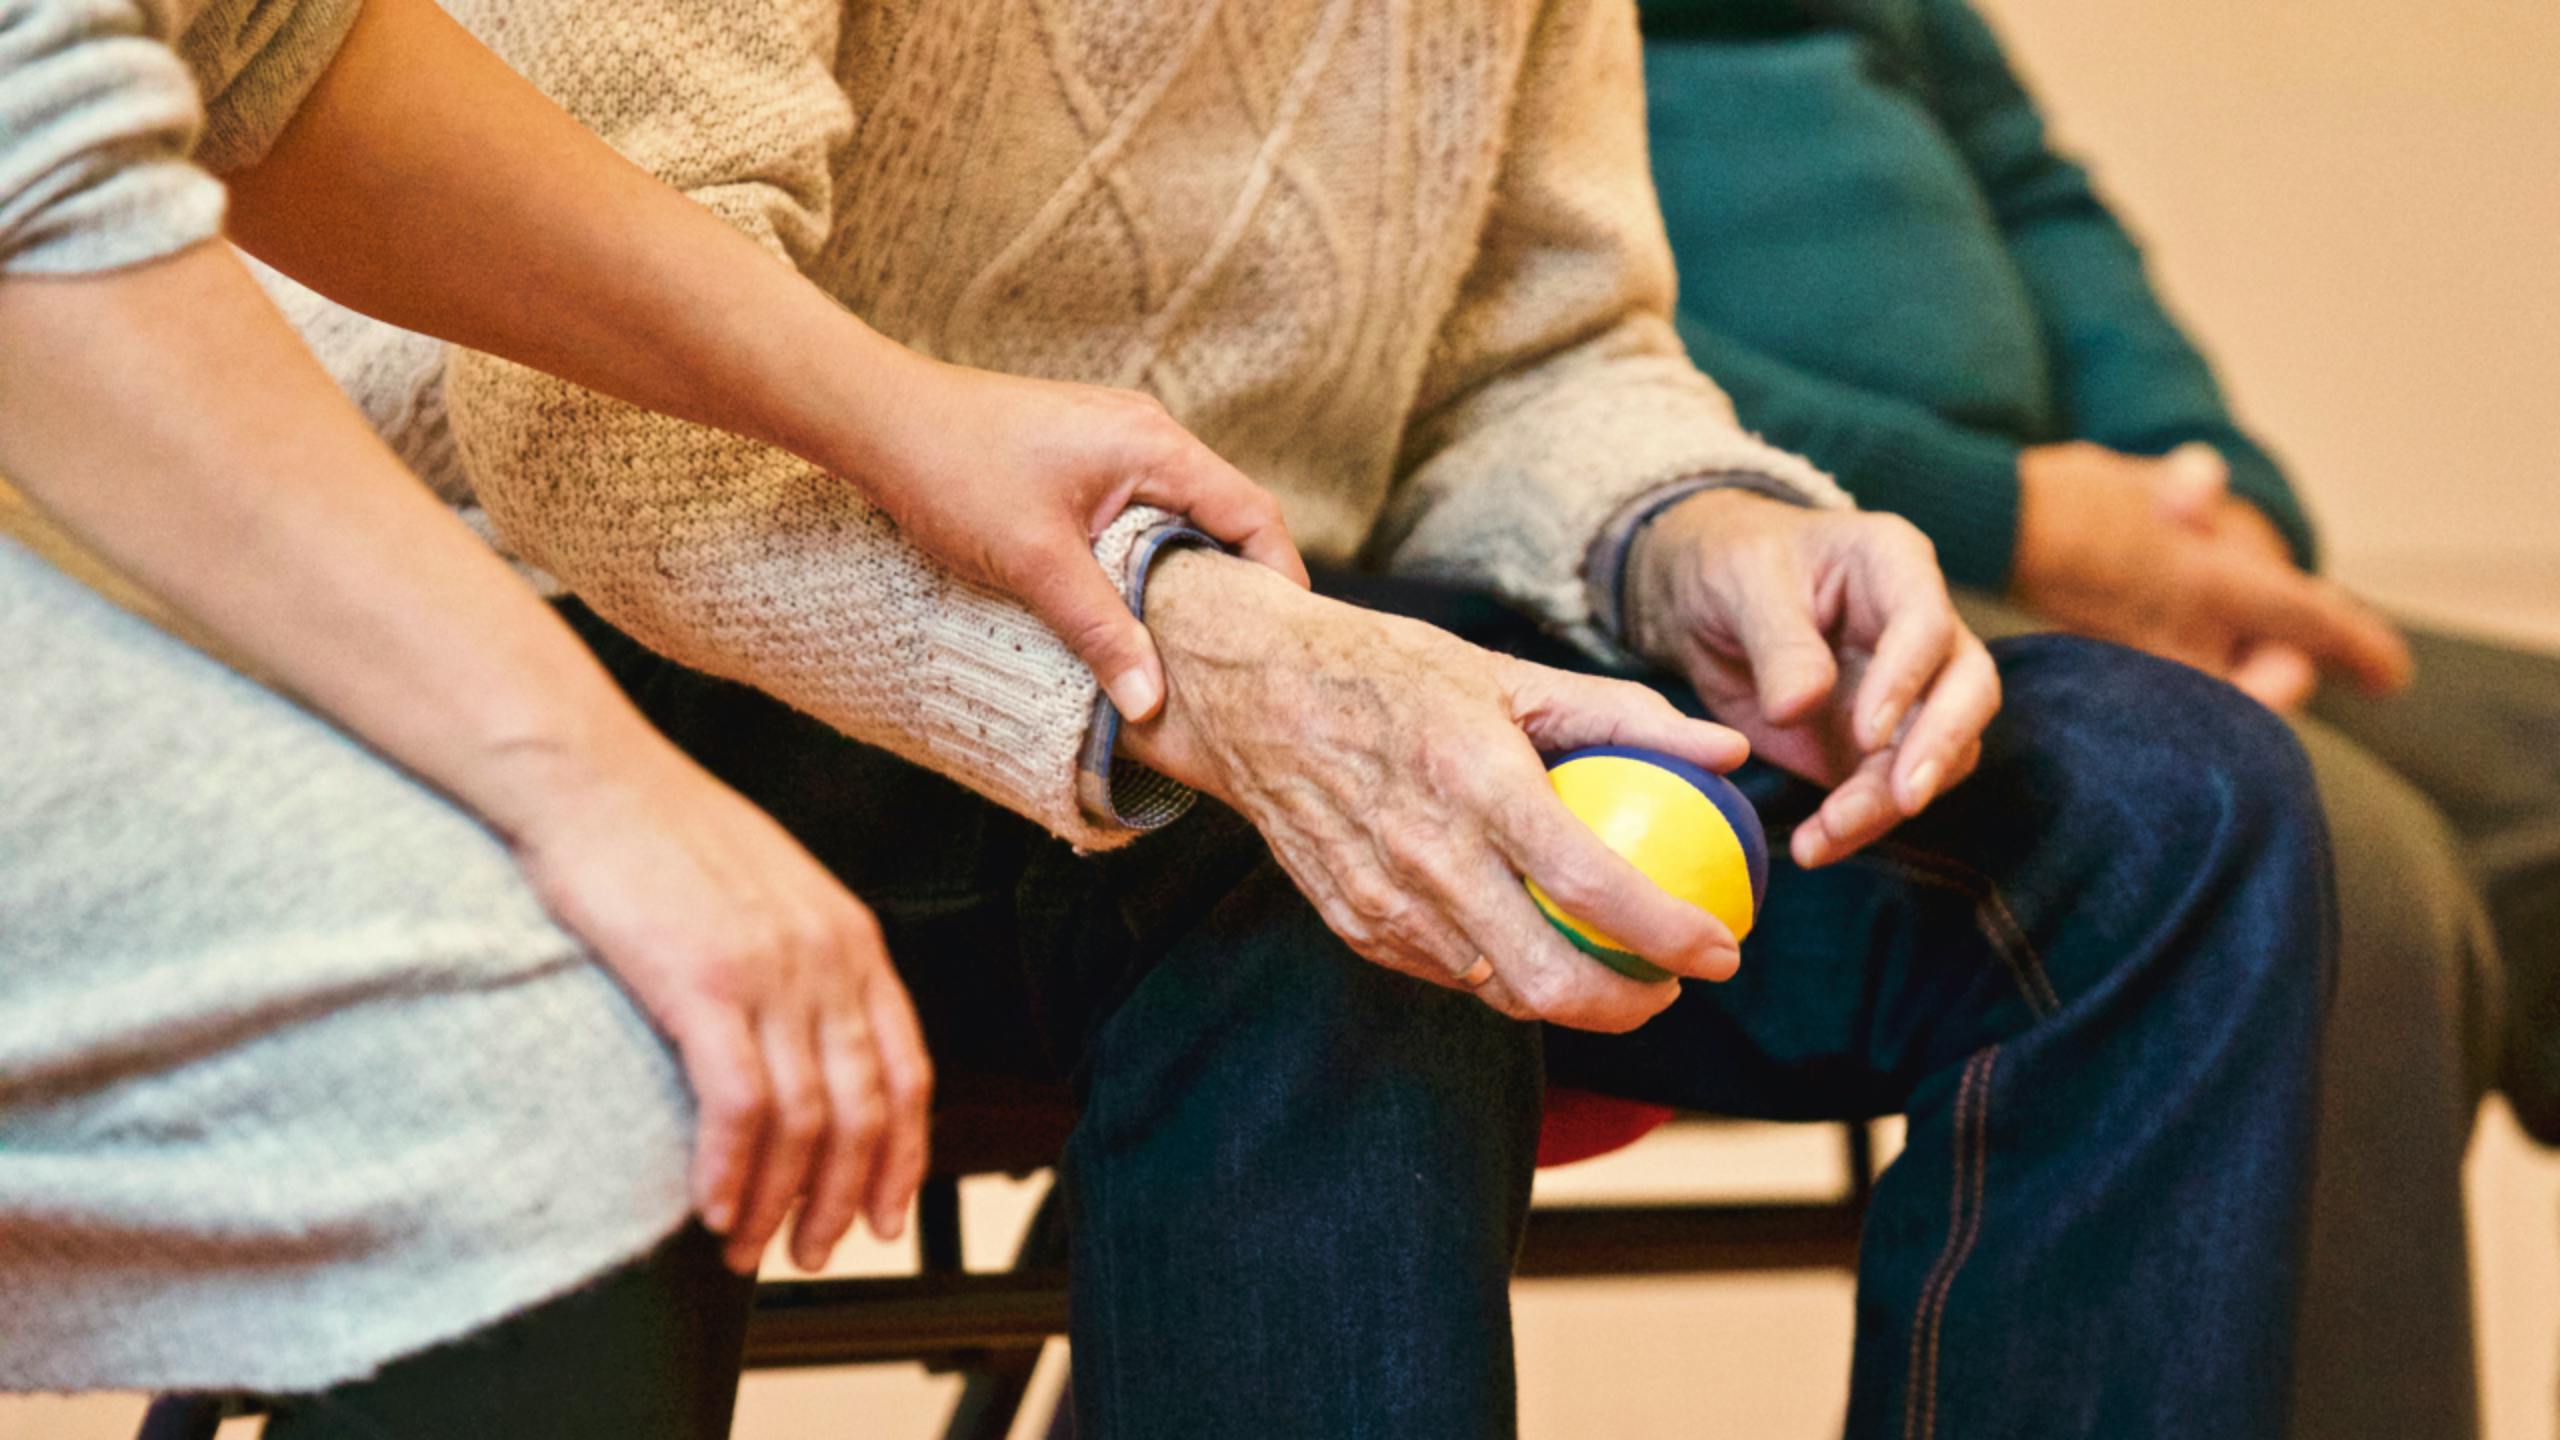 Image is a close up on the torso and hands of a young woman and an elderly man. The elderly man holds a ball in one hand. The young woman has a gentle grip on the elderly man's arm.